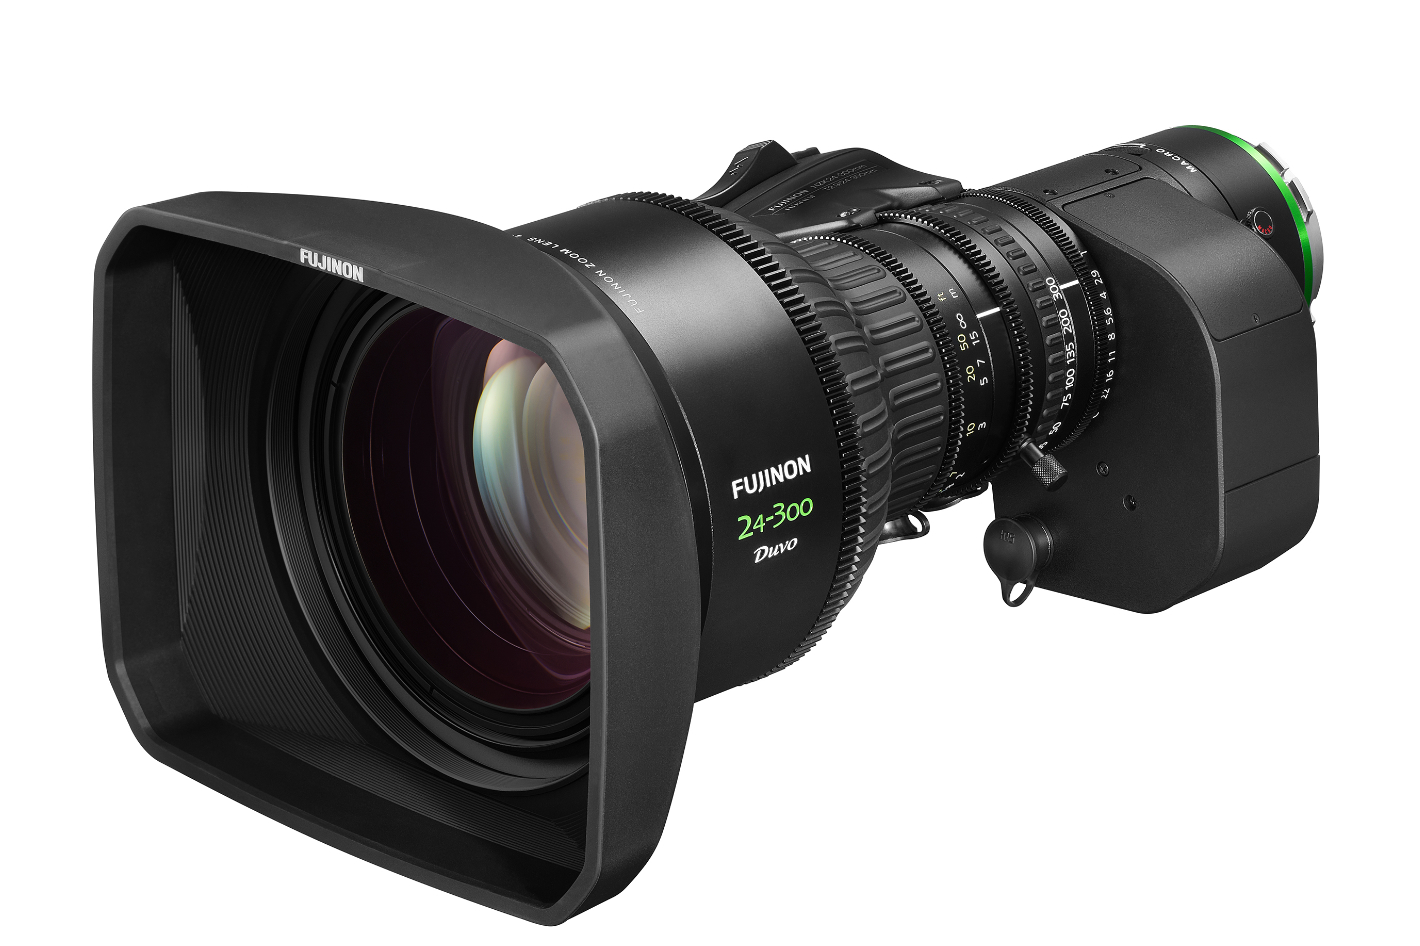 FUJINON Duvo HZK24-300mm PL Mount Zoom Lens now available 24